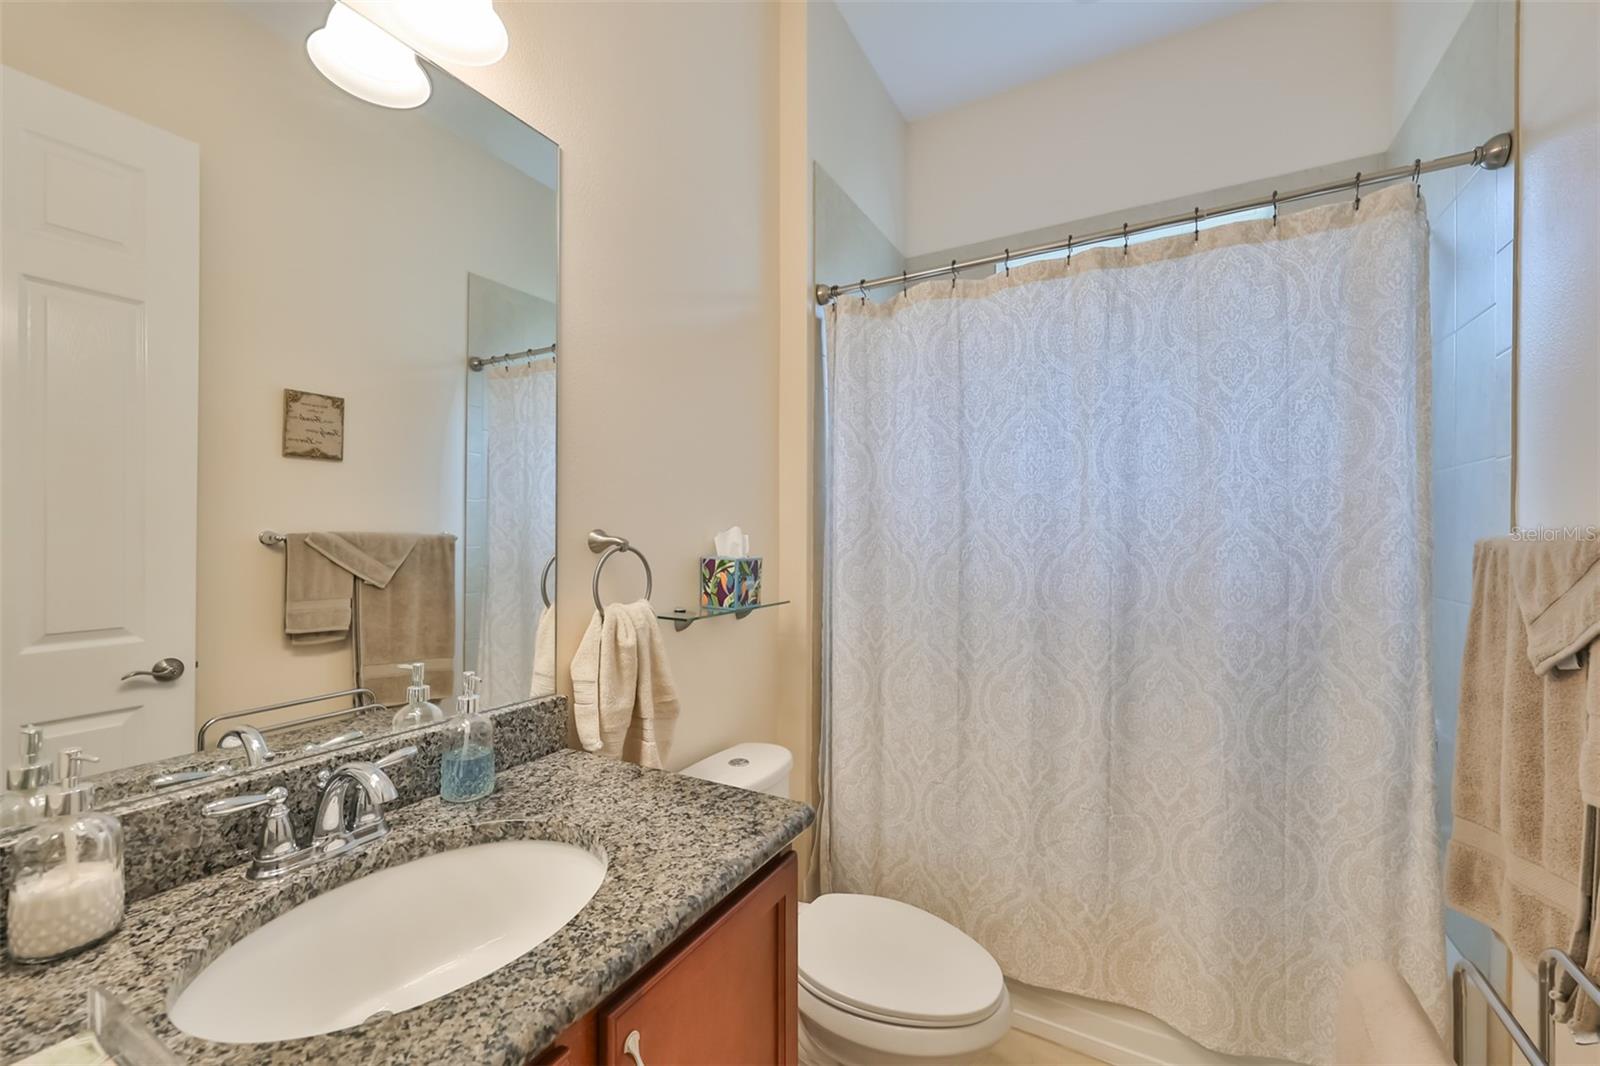 Guest Bathroom has granite countertops and matching cabinetry, porcelain tile flooring with a tub/shower combo.  Located right next to Bedroom #2, for ultimate privacy.